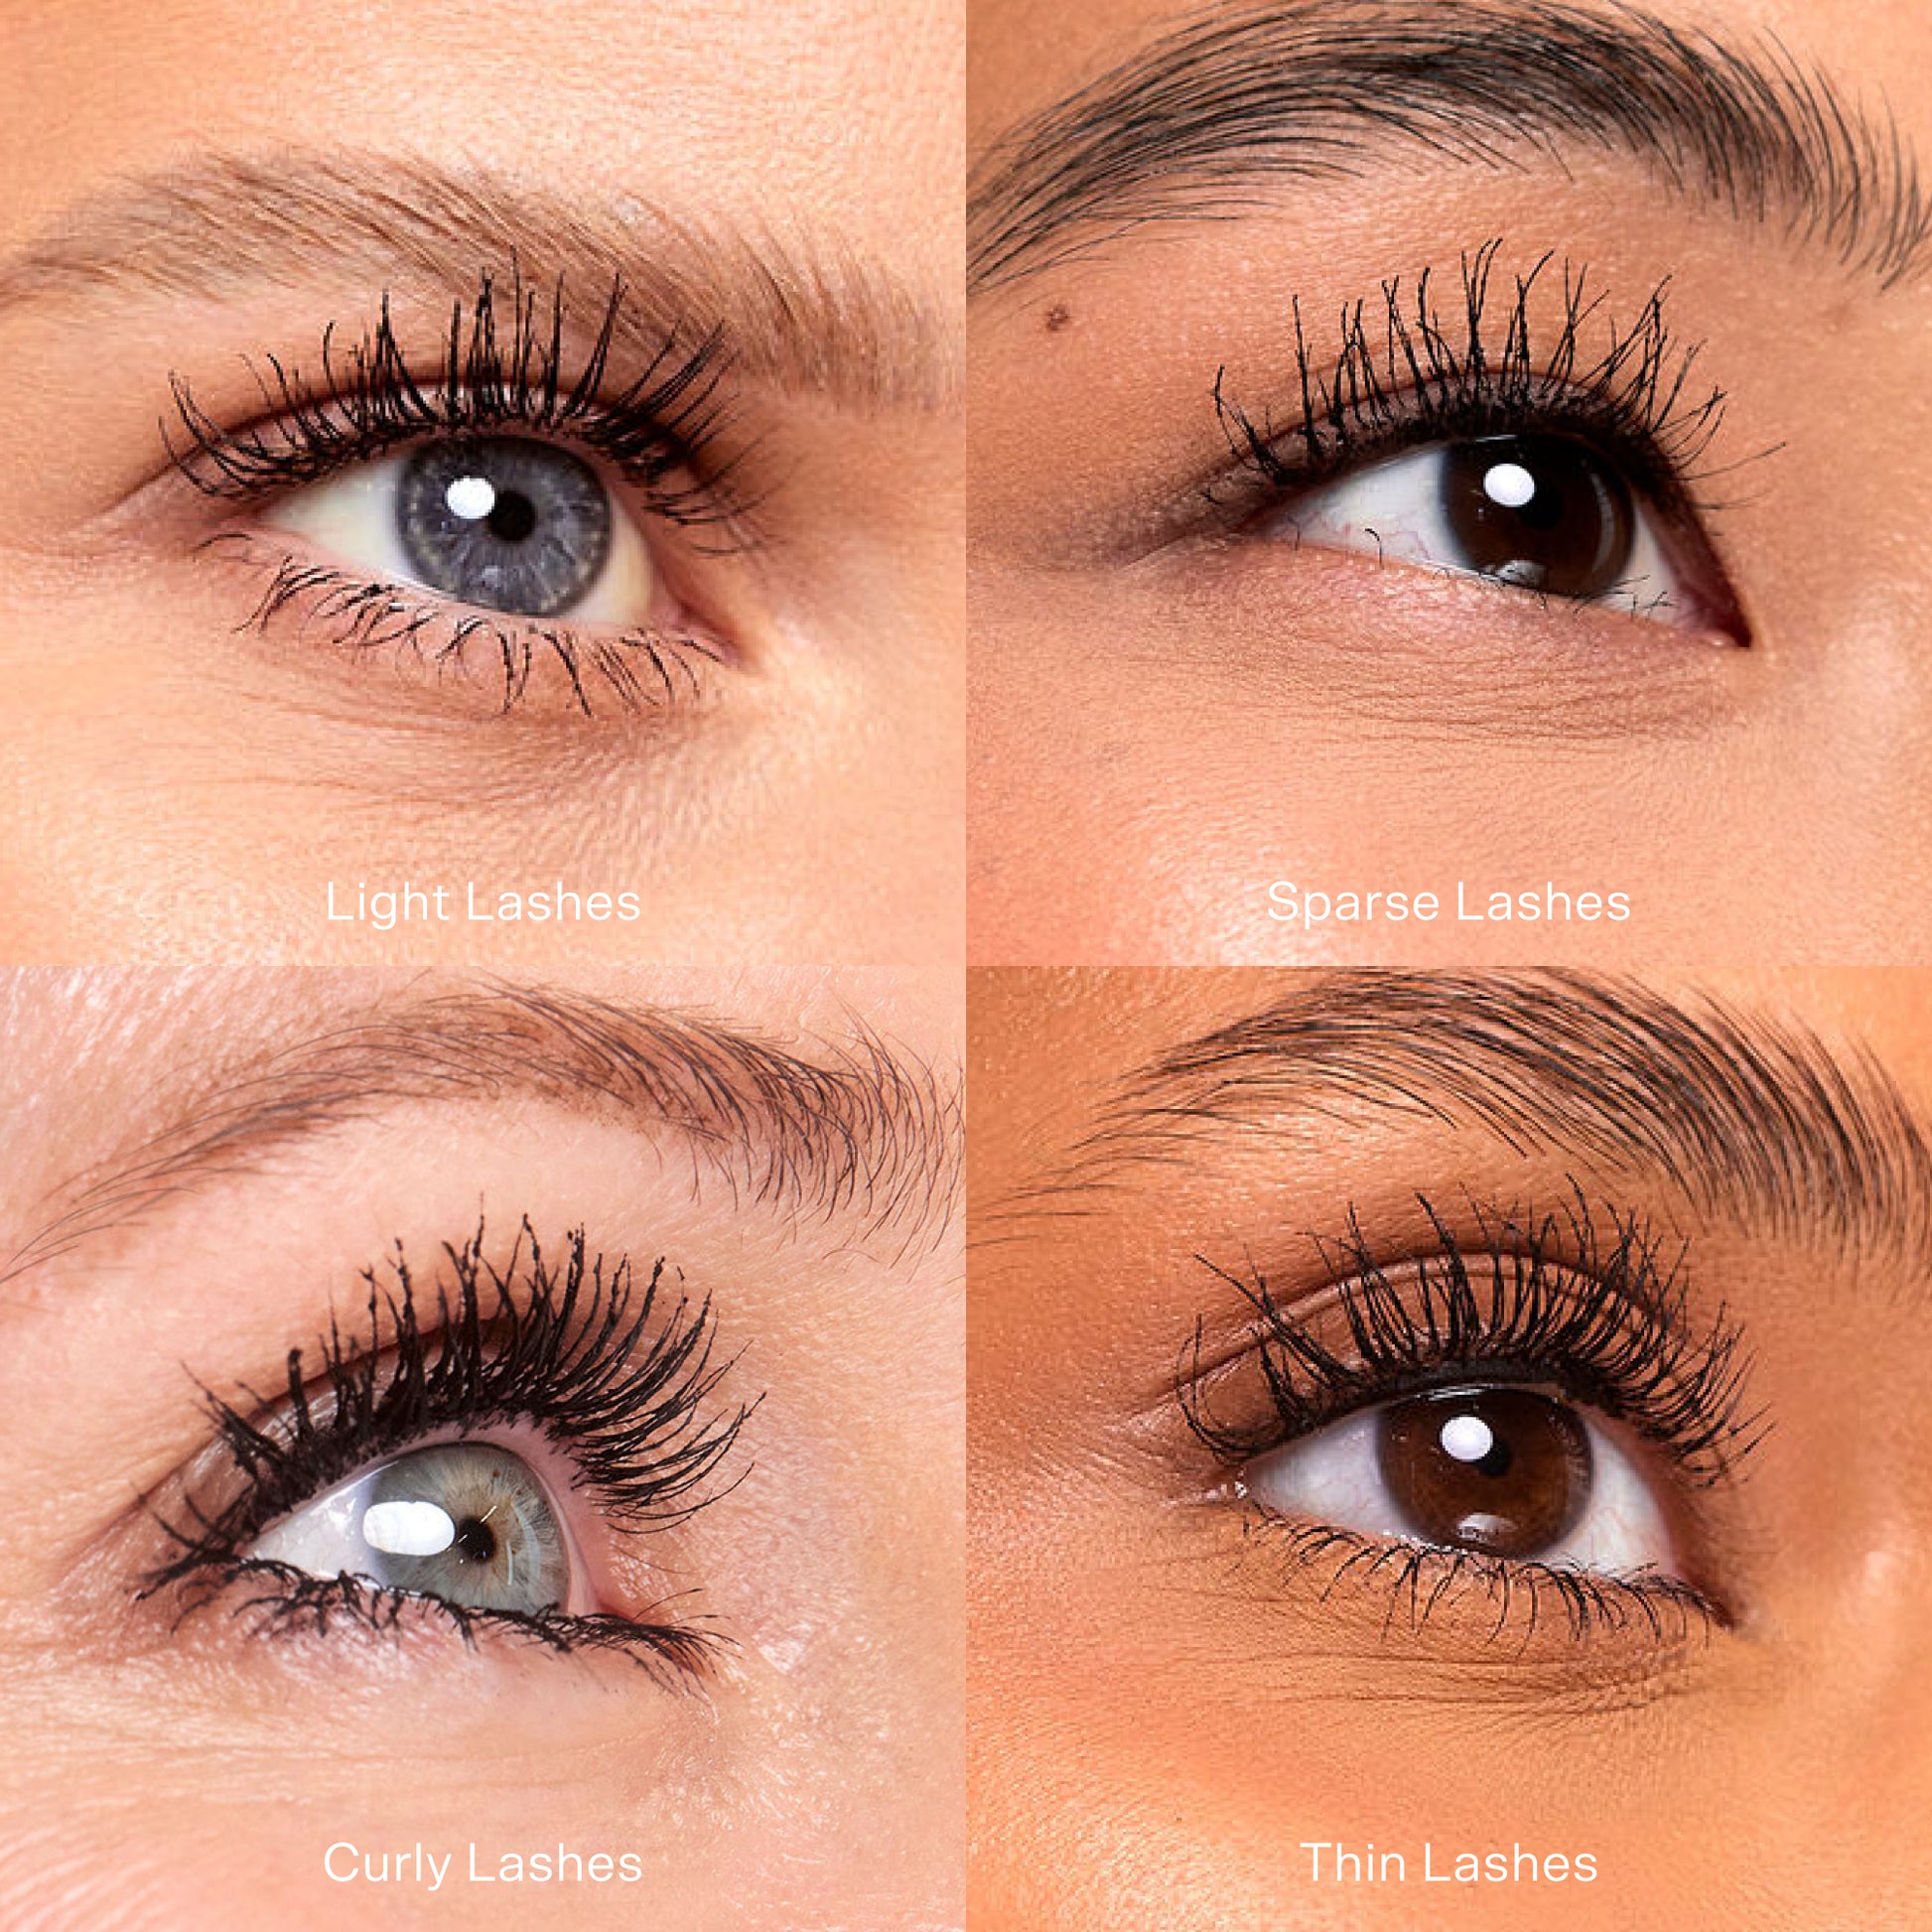 Shared: four different models demonstrating the effects of the Tower 28 Beauty MakeWaves™ Mascara on light, sparse, curly and thin lashes